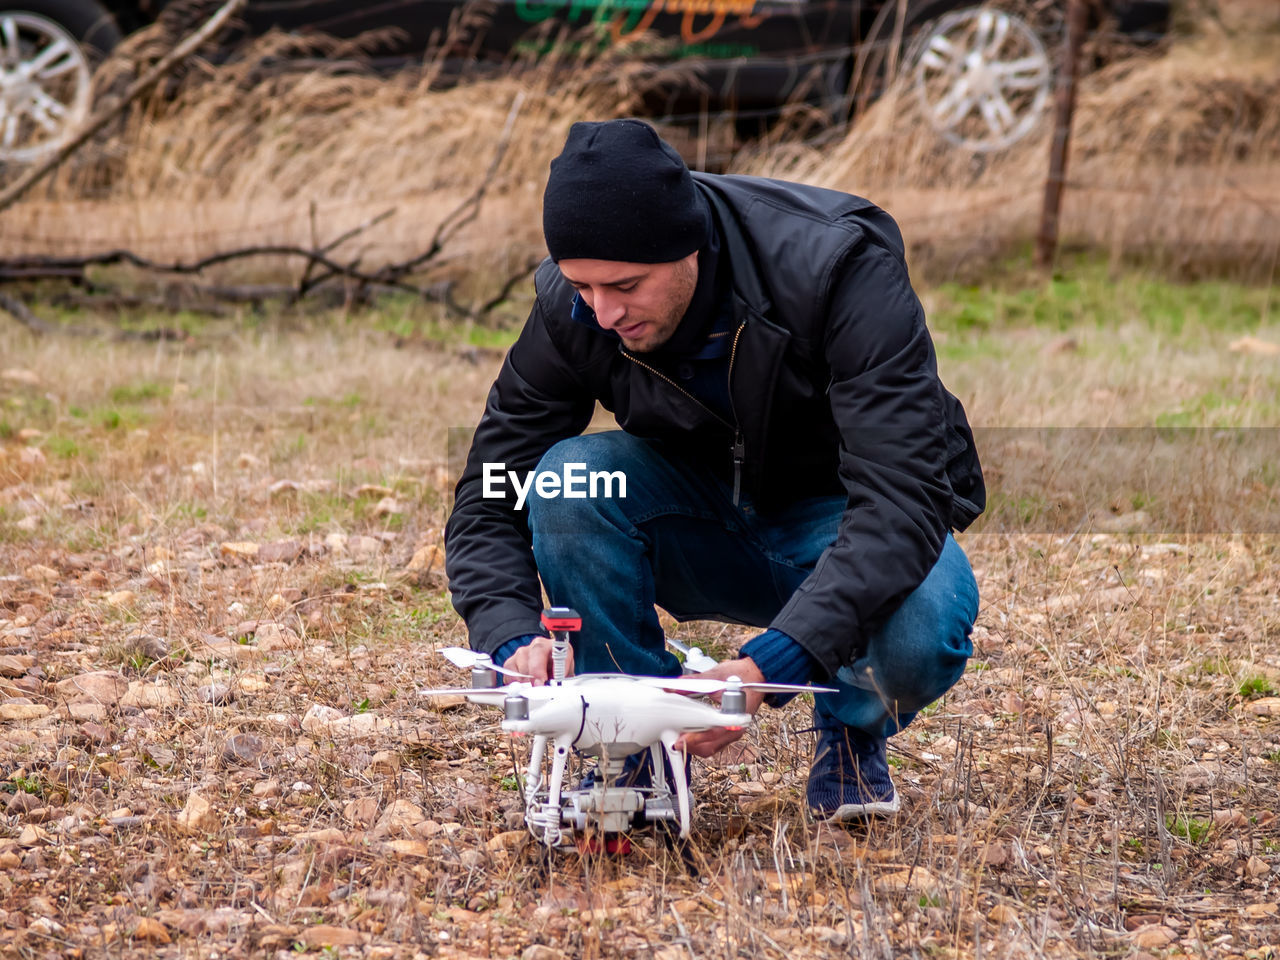 Man crouching by drone on grass